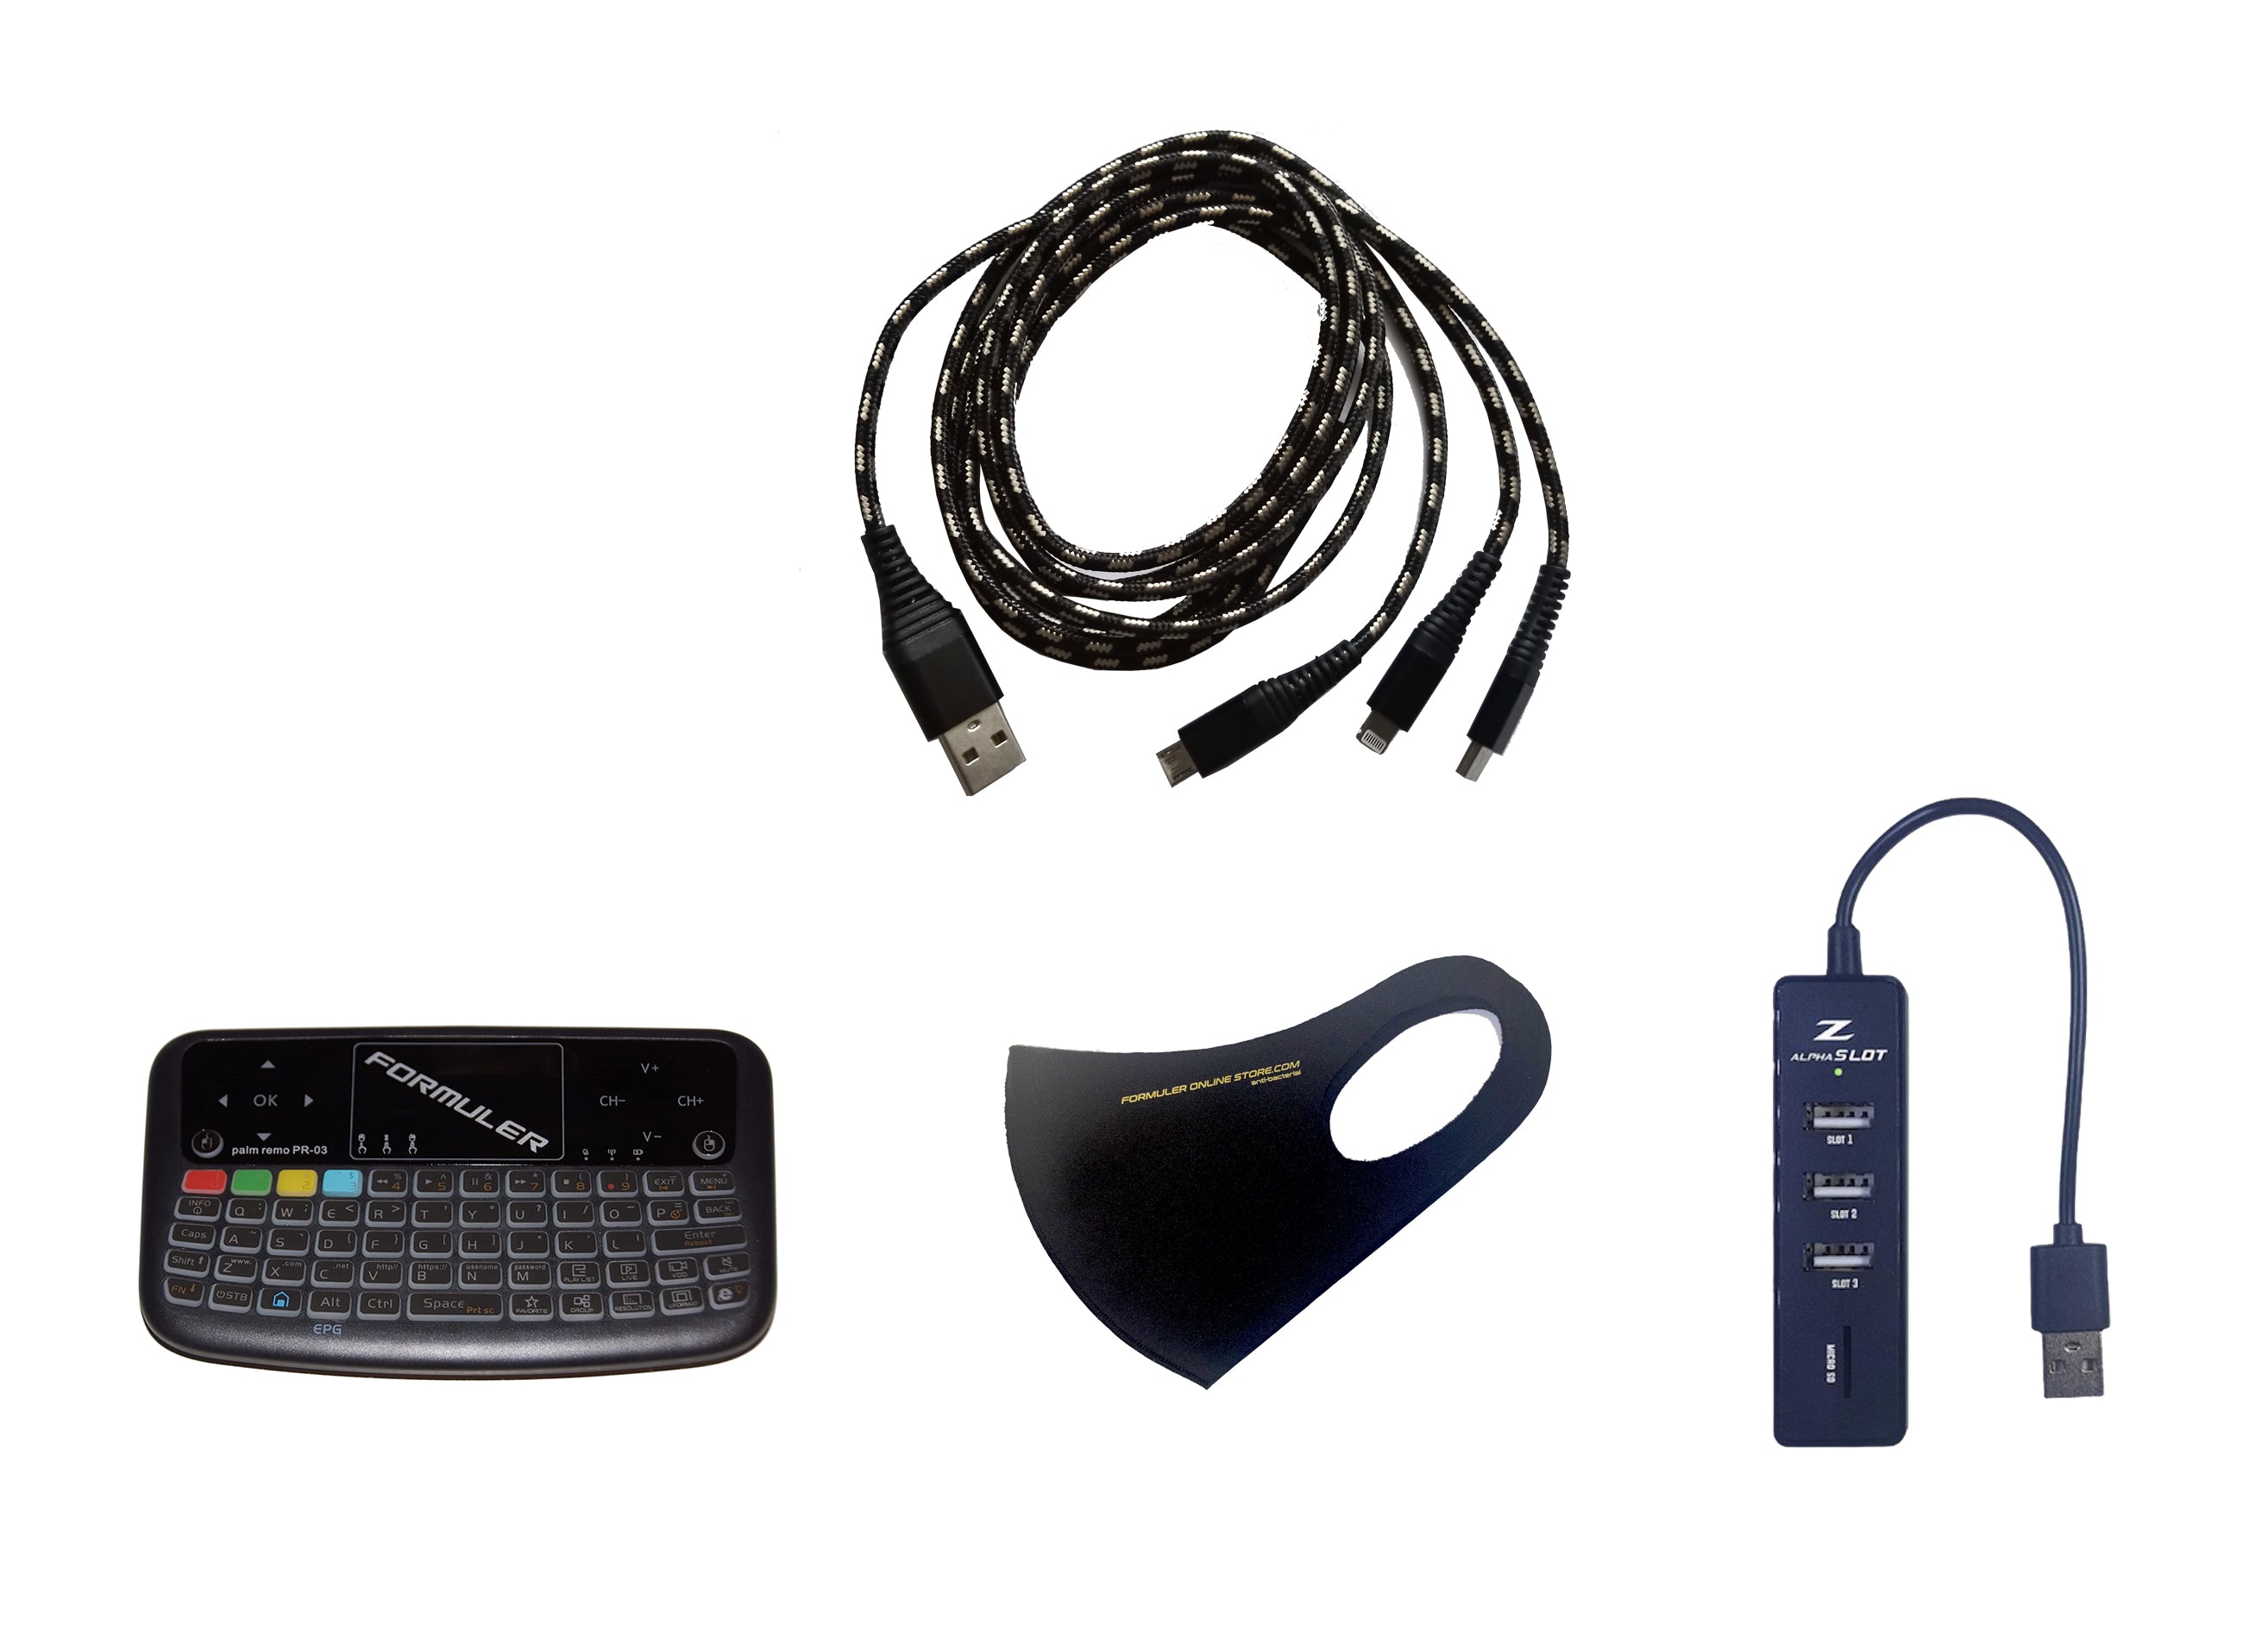 Accessoires bundle included: Wireless Mini keyboard with touchpad + USB Hub + USB 3-1 Cord extension + Mask